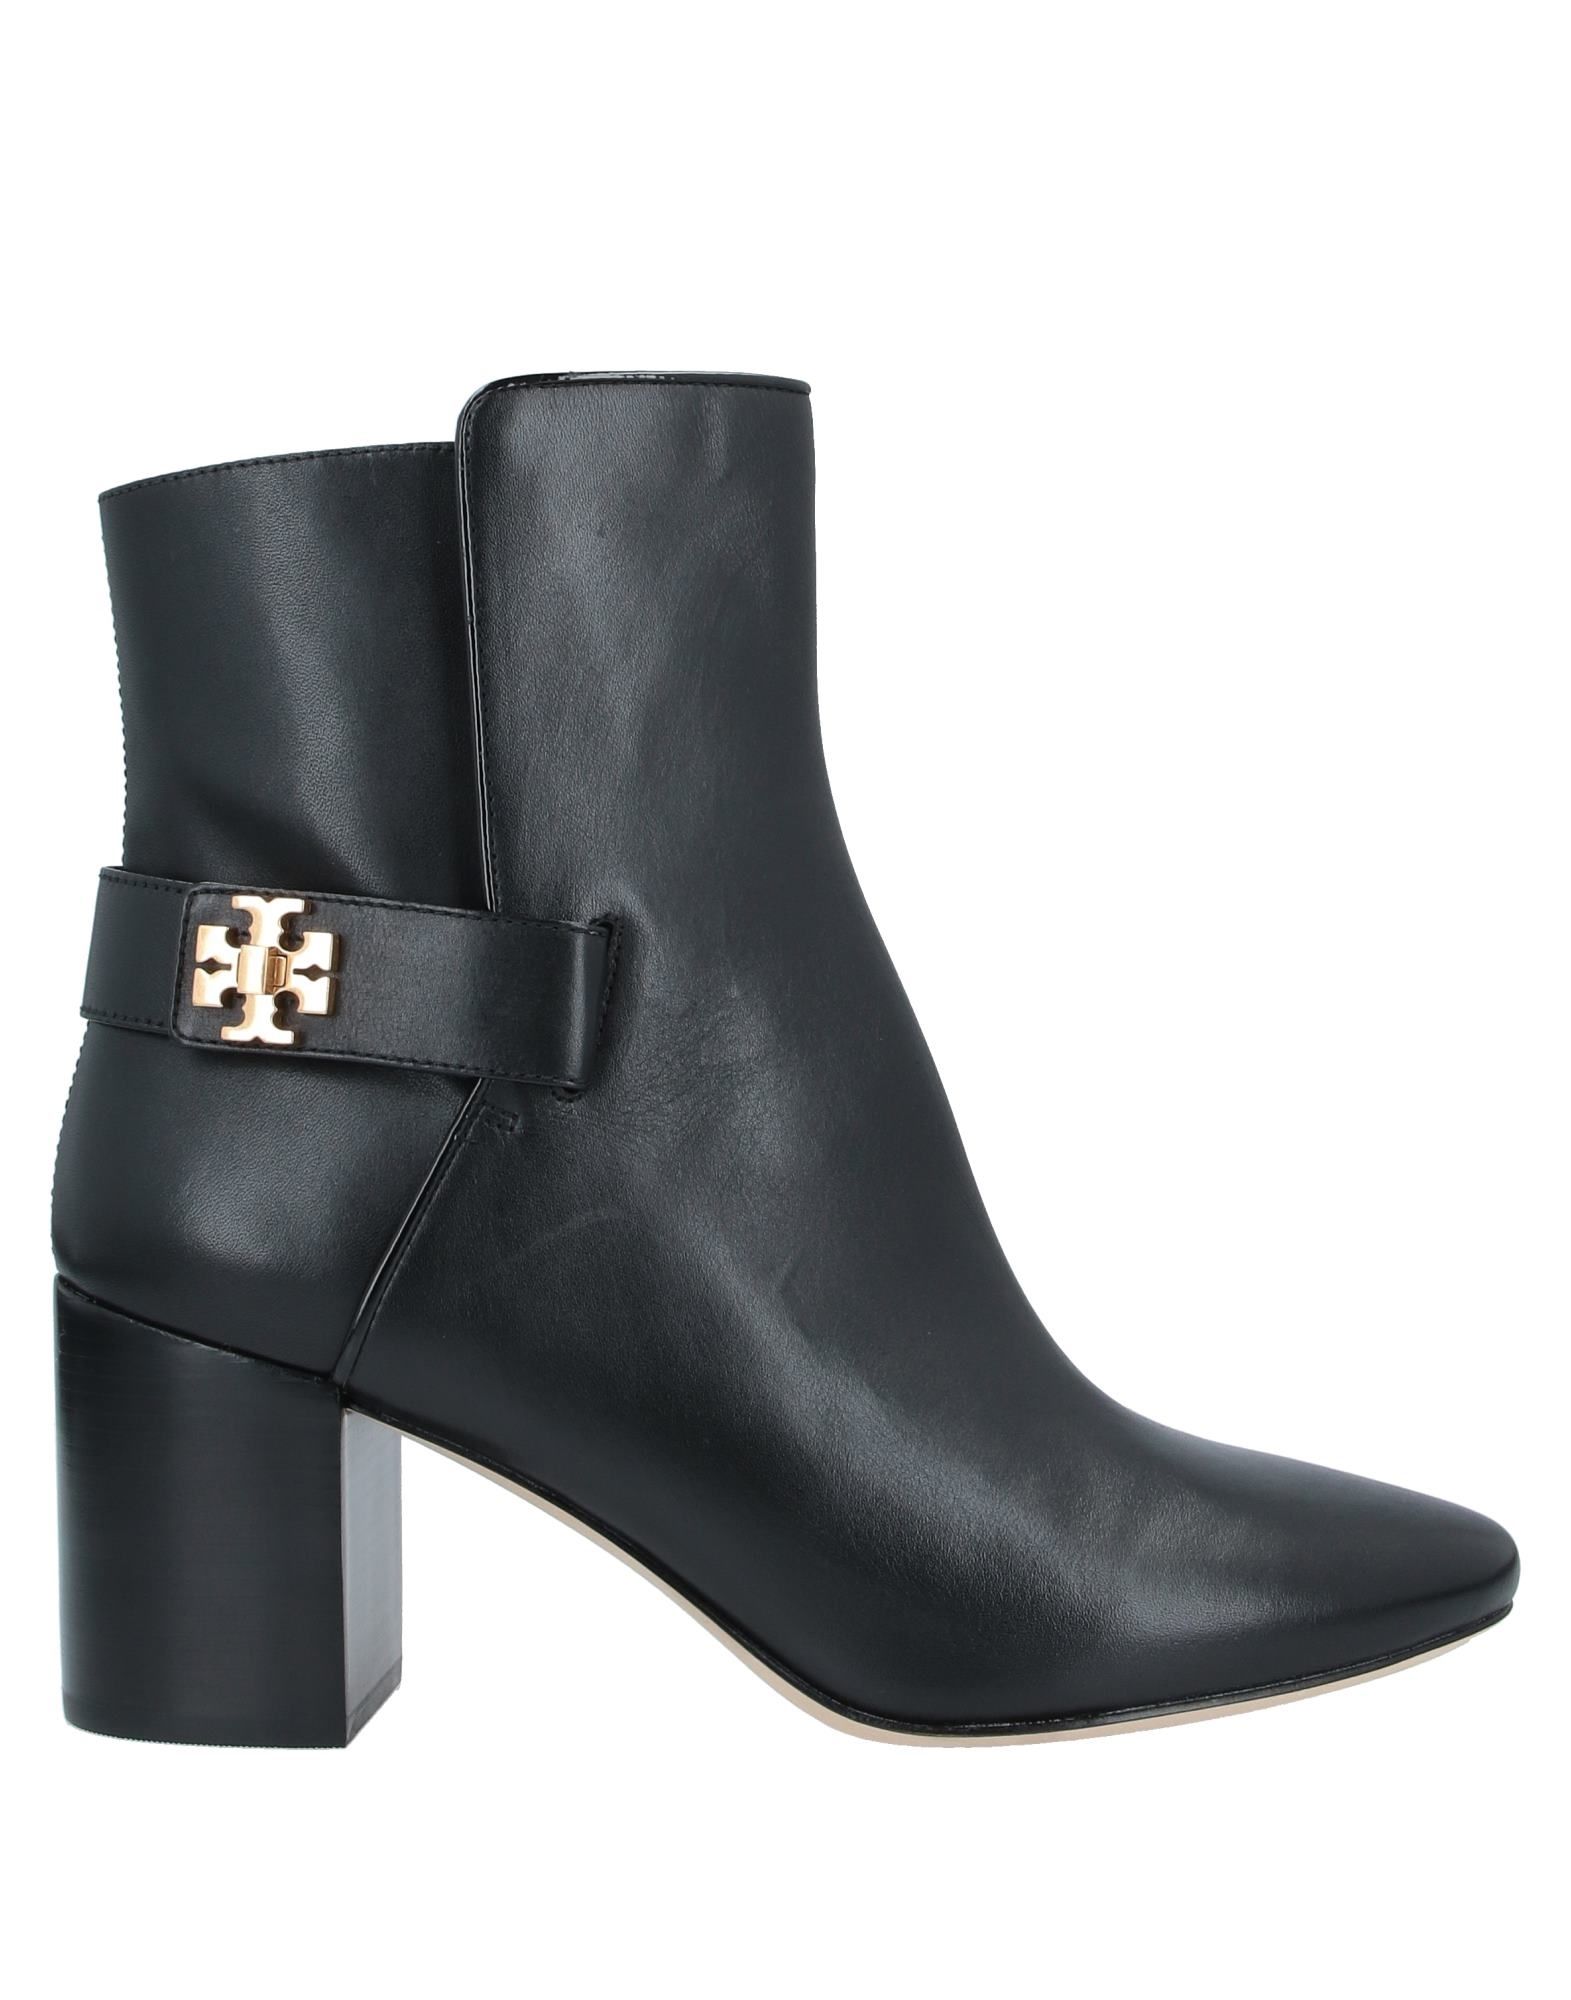 TORY BURCH Ankle boots - Item 11935451